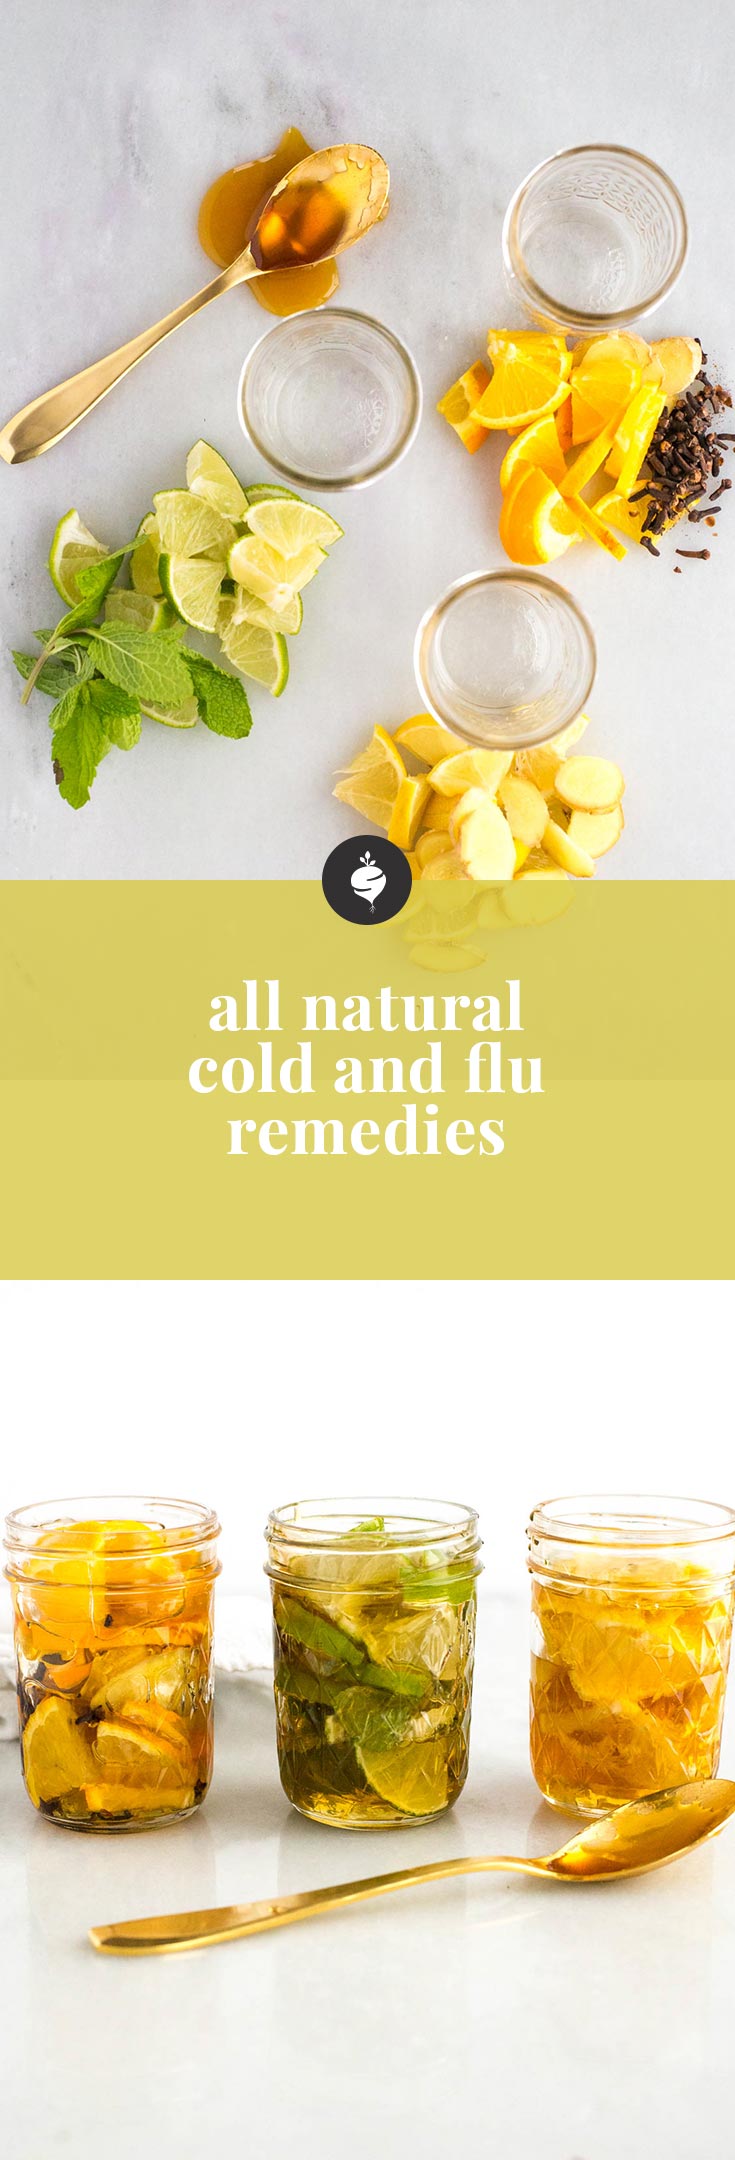 The only all natural cold and flu remedy you need and made from ingredients you have at home.